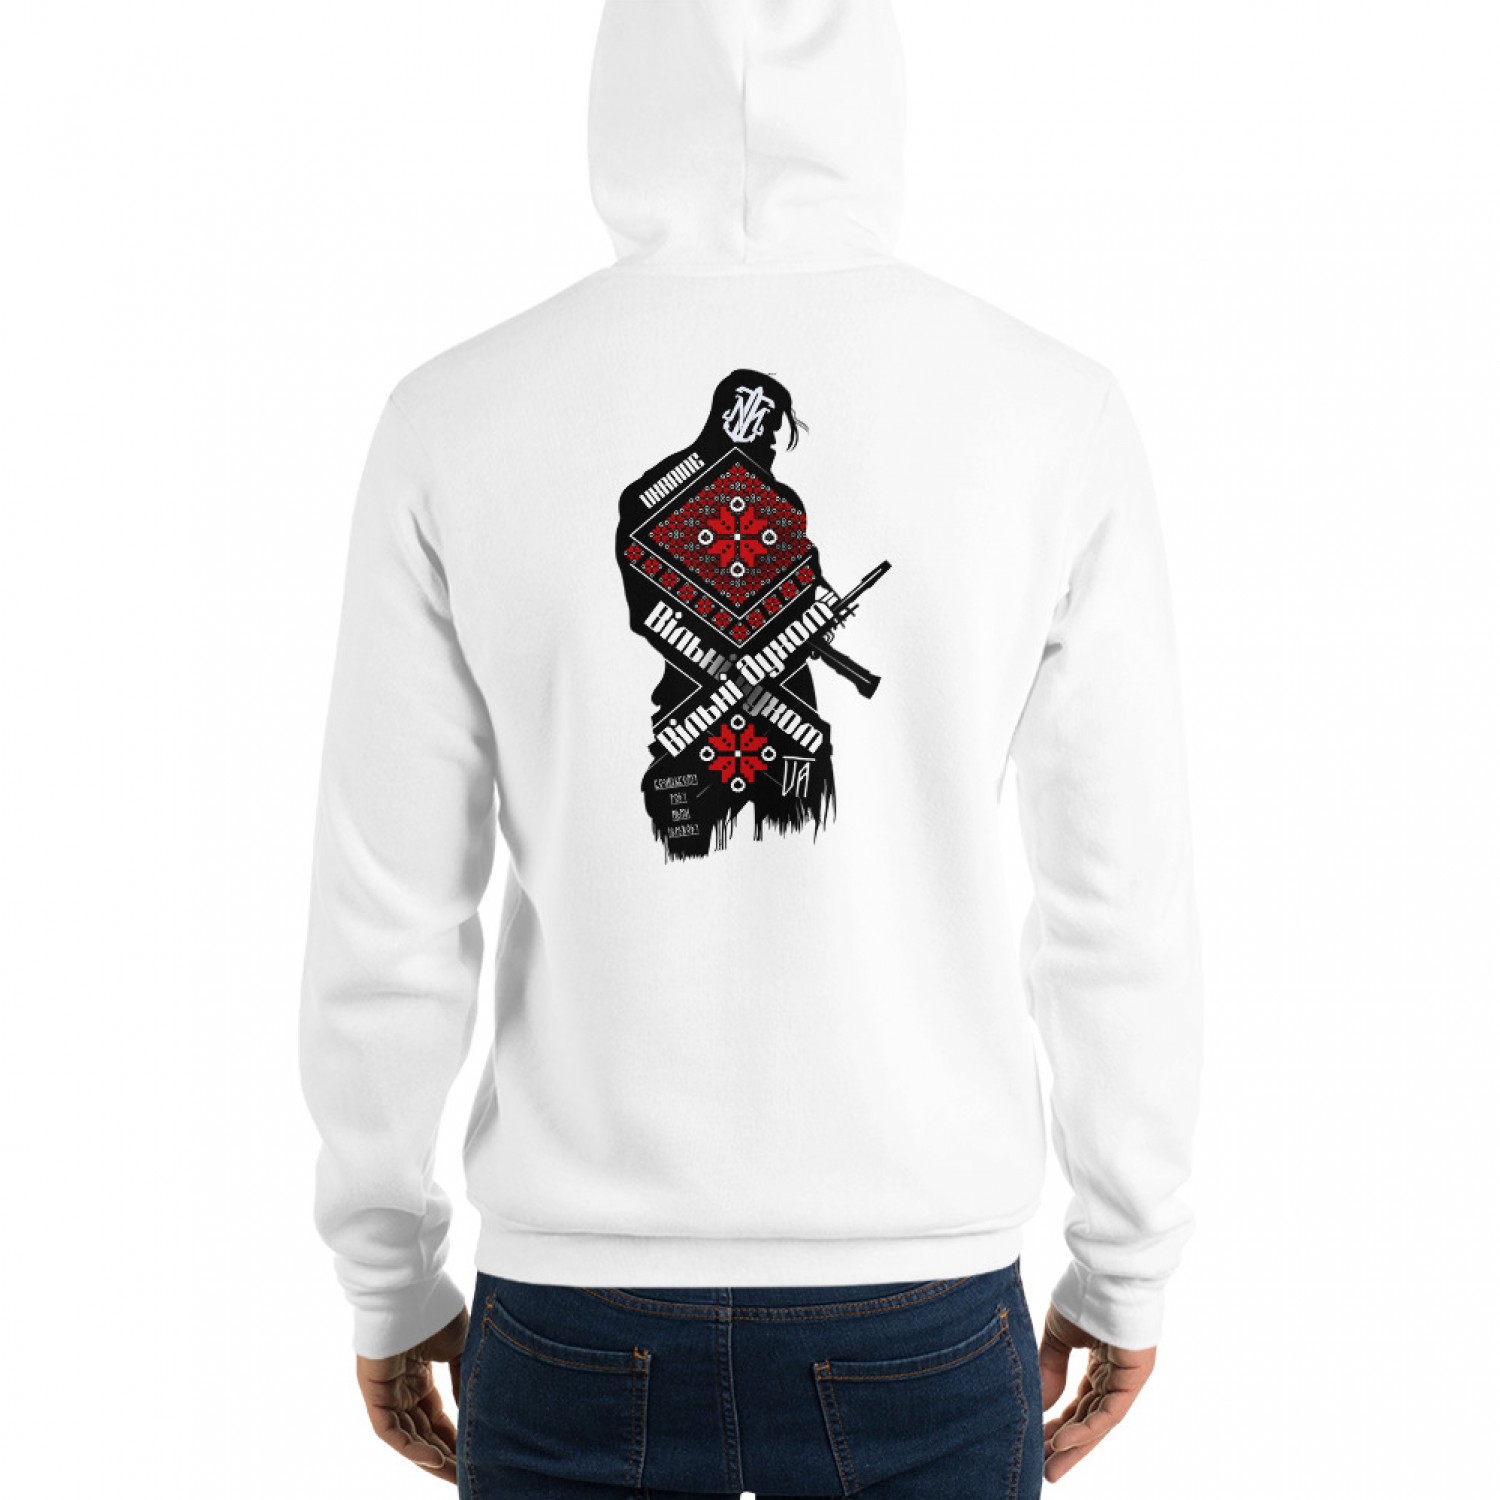 Buy a comfortable hoodie for Cossacks Free in spirit